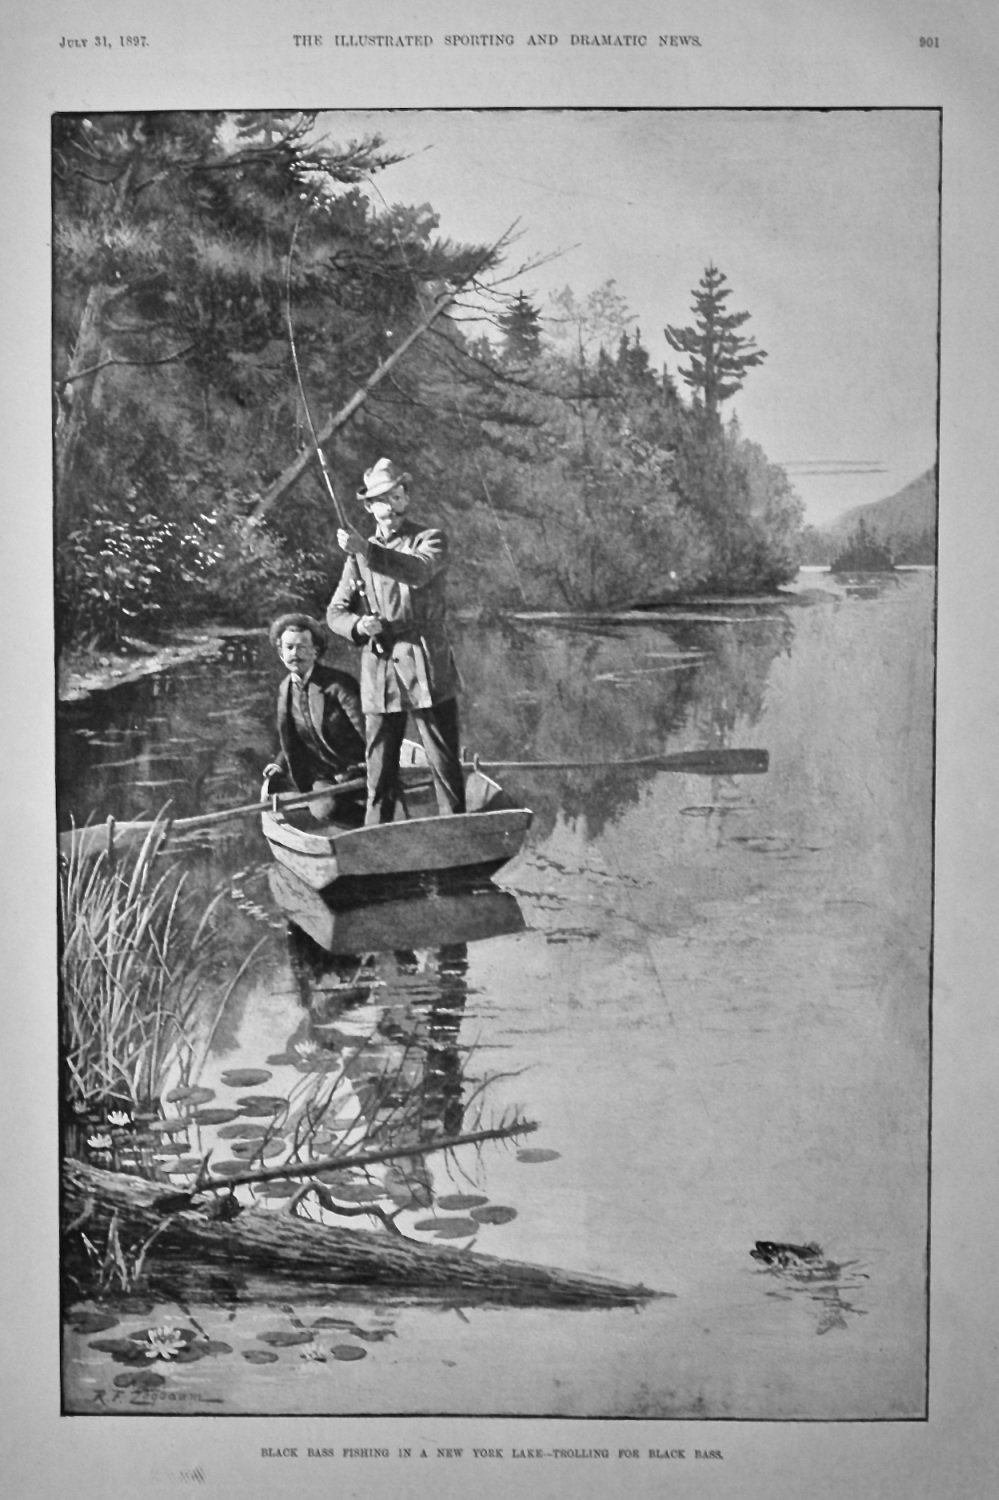 Black Bass Fishing in a New York Lake - Trolling for Black Bass.  1897.